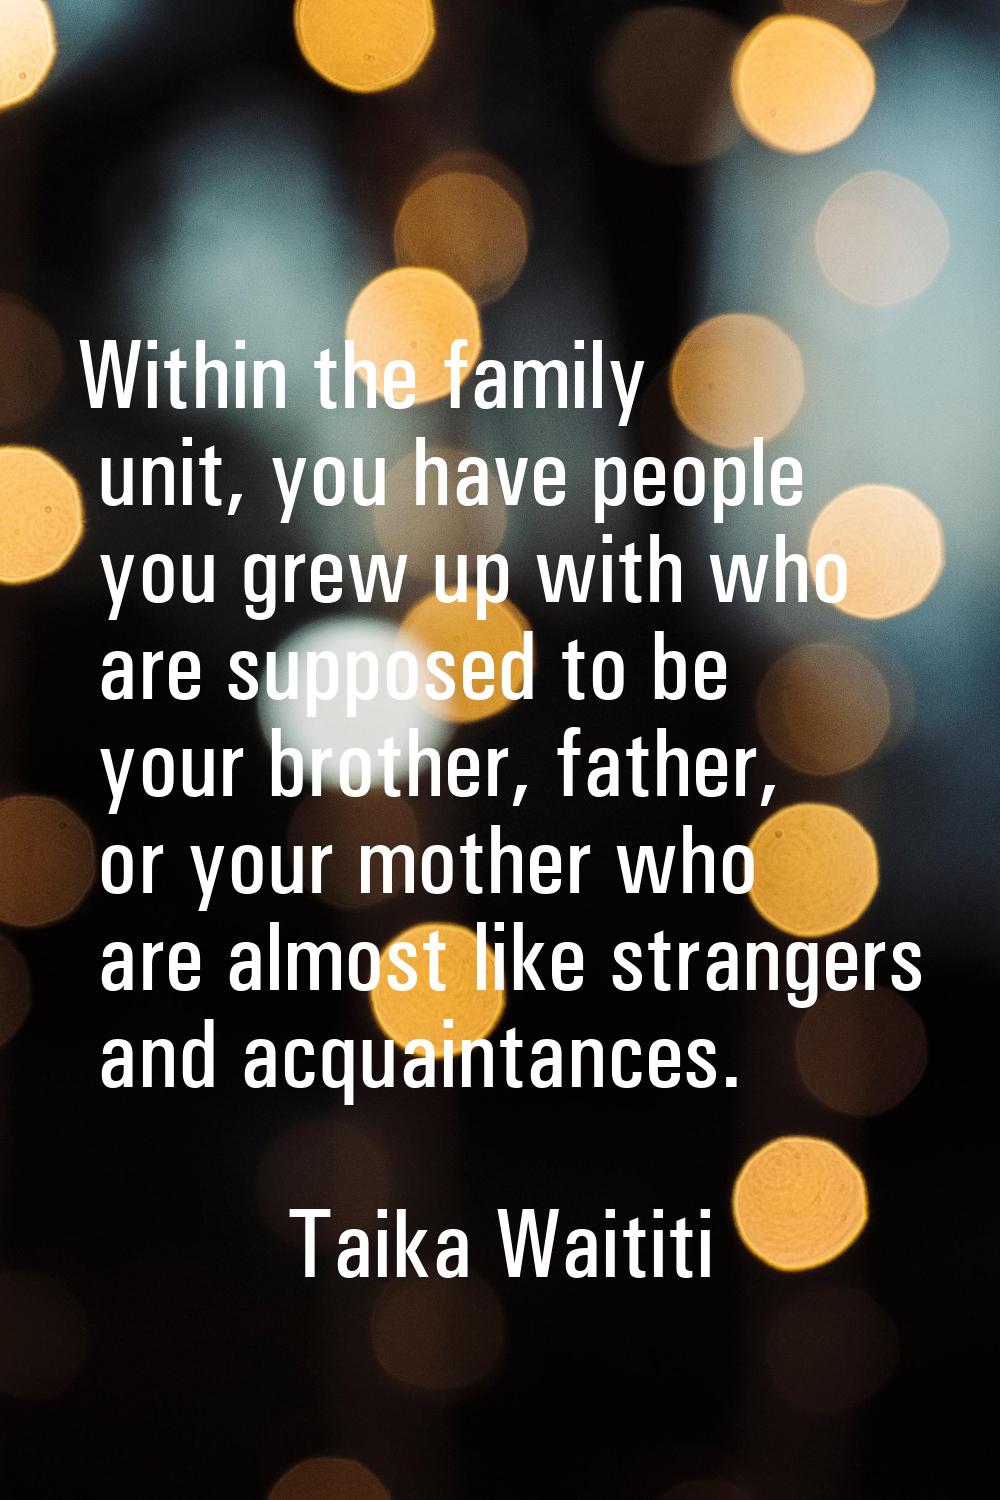 Within the family unit, you have people you grew up with who are supposed to be your brother, fathe